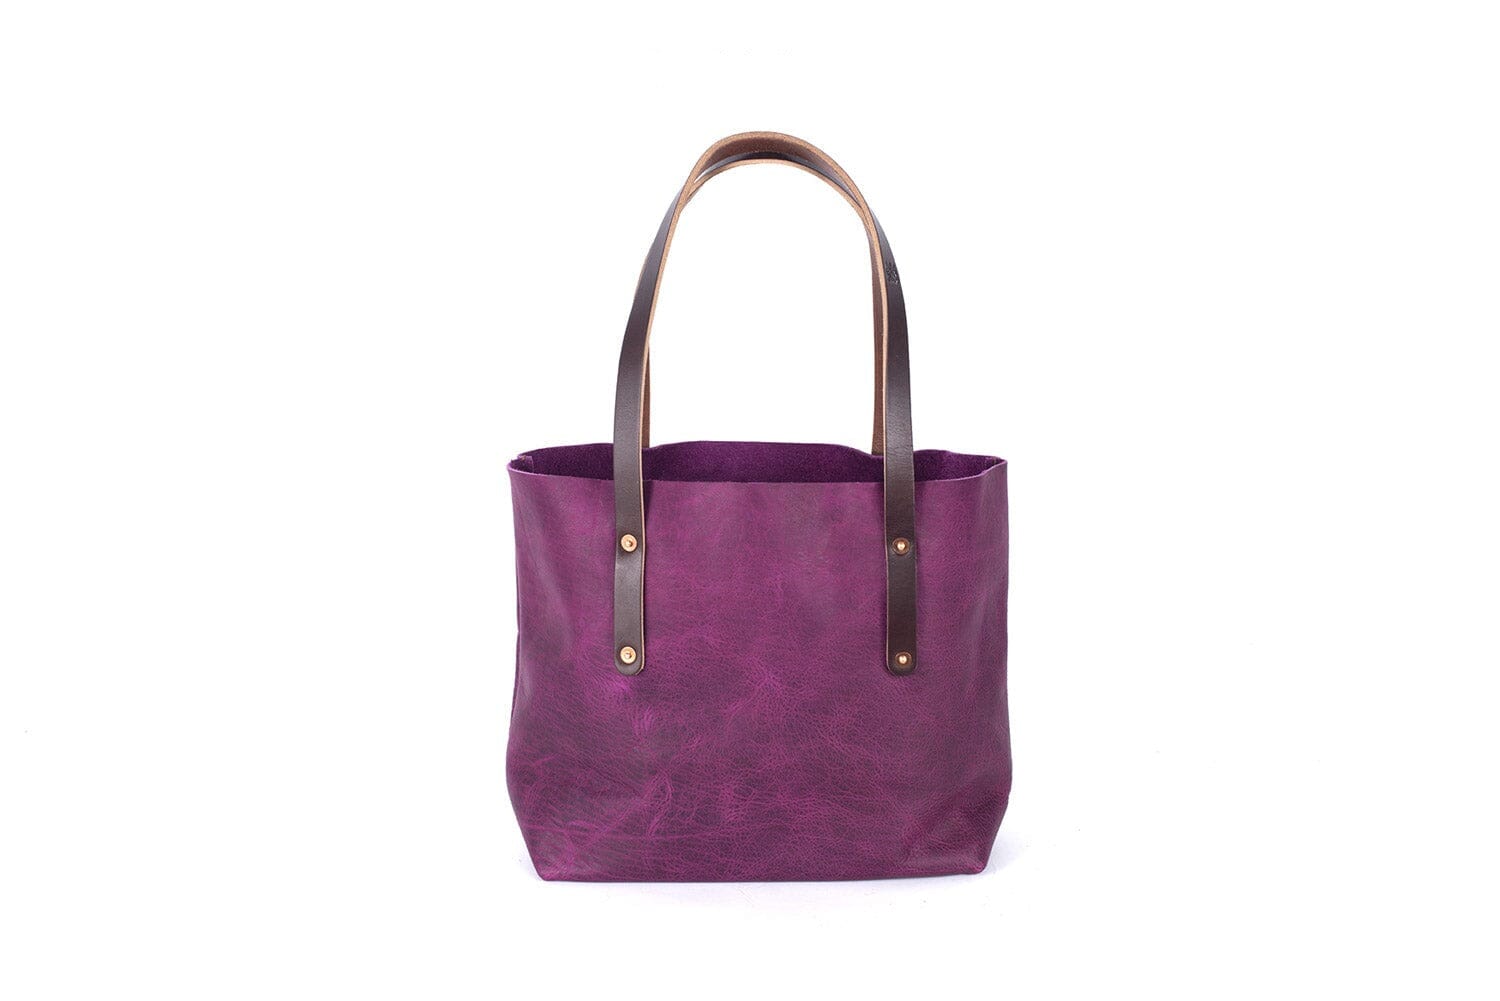 AVERY LEATHER TOTE BAG - SMALL - GRAPE BISON